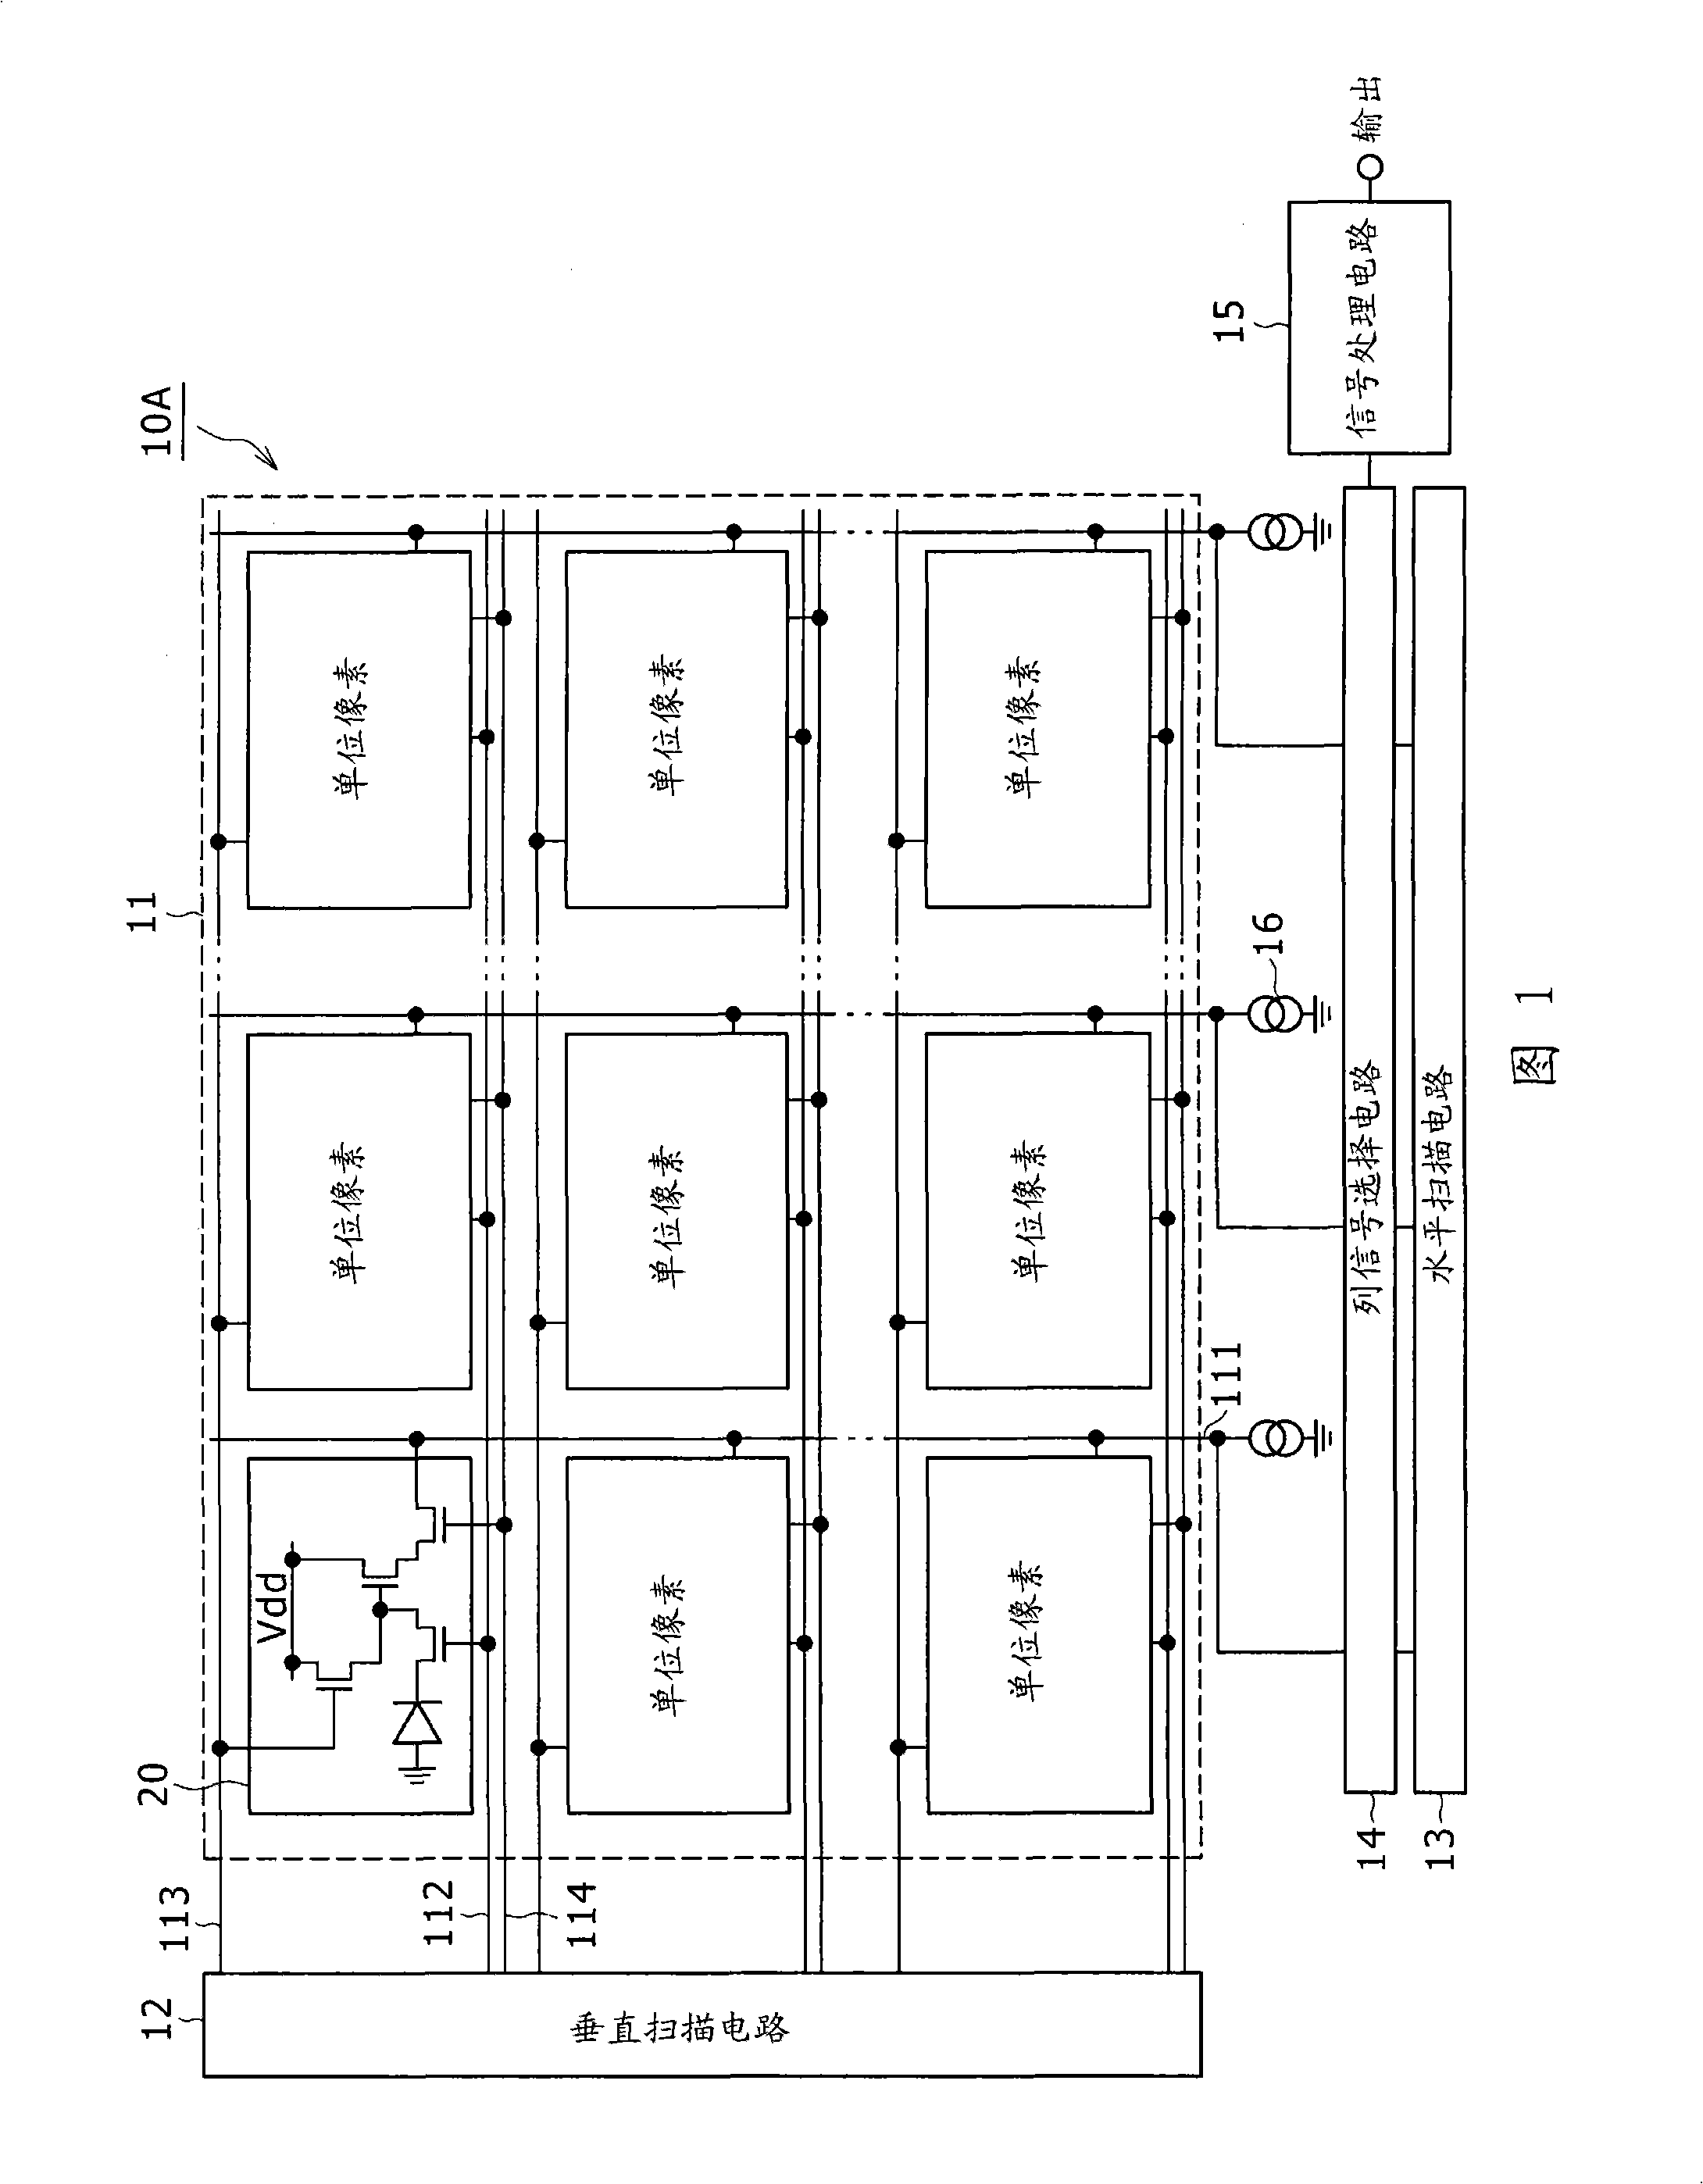 Solid-state imaging device, signal processing method for the same, and imaging apparatus